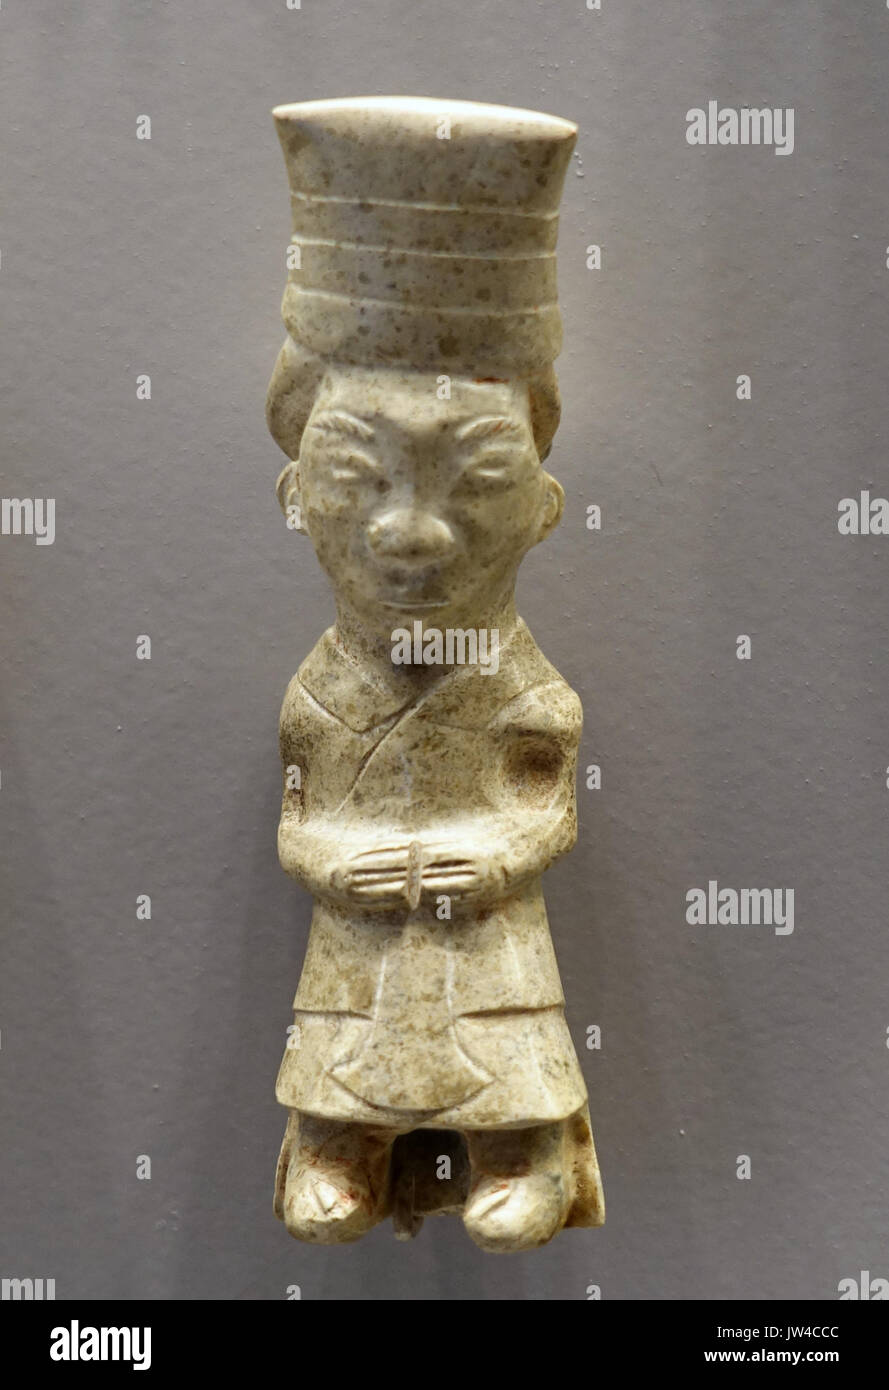 Statuette of a Standing Dignitary, China, Shang dynasty, 12th 11th century BC, nephrite   Arthur M  Sackler Museum, Harvard University   DSC00742 Stock Photo